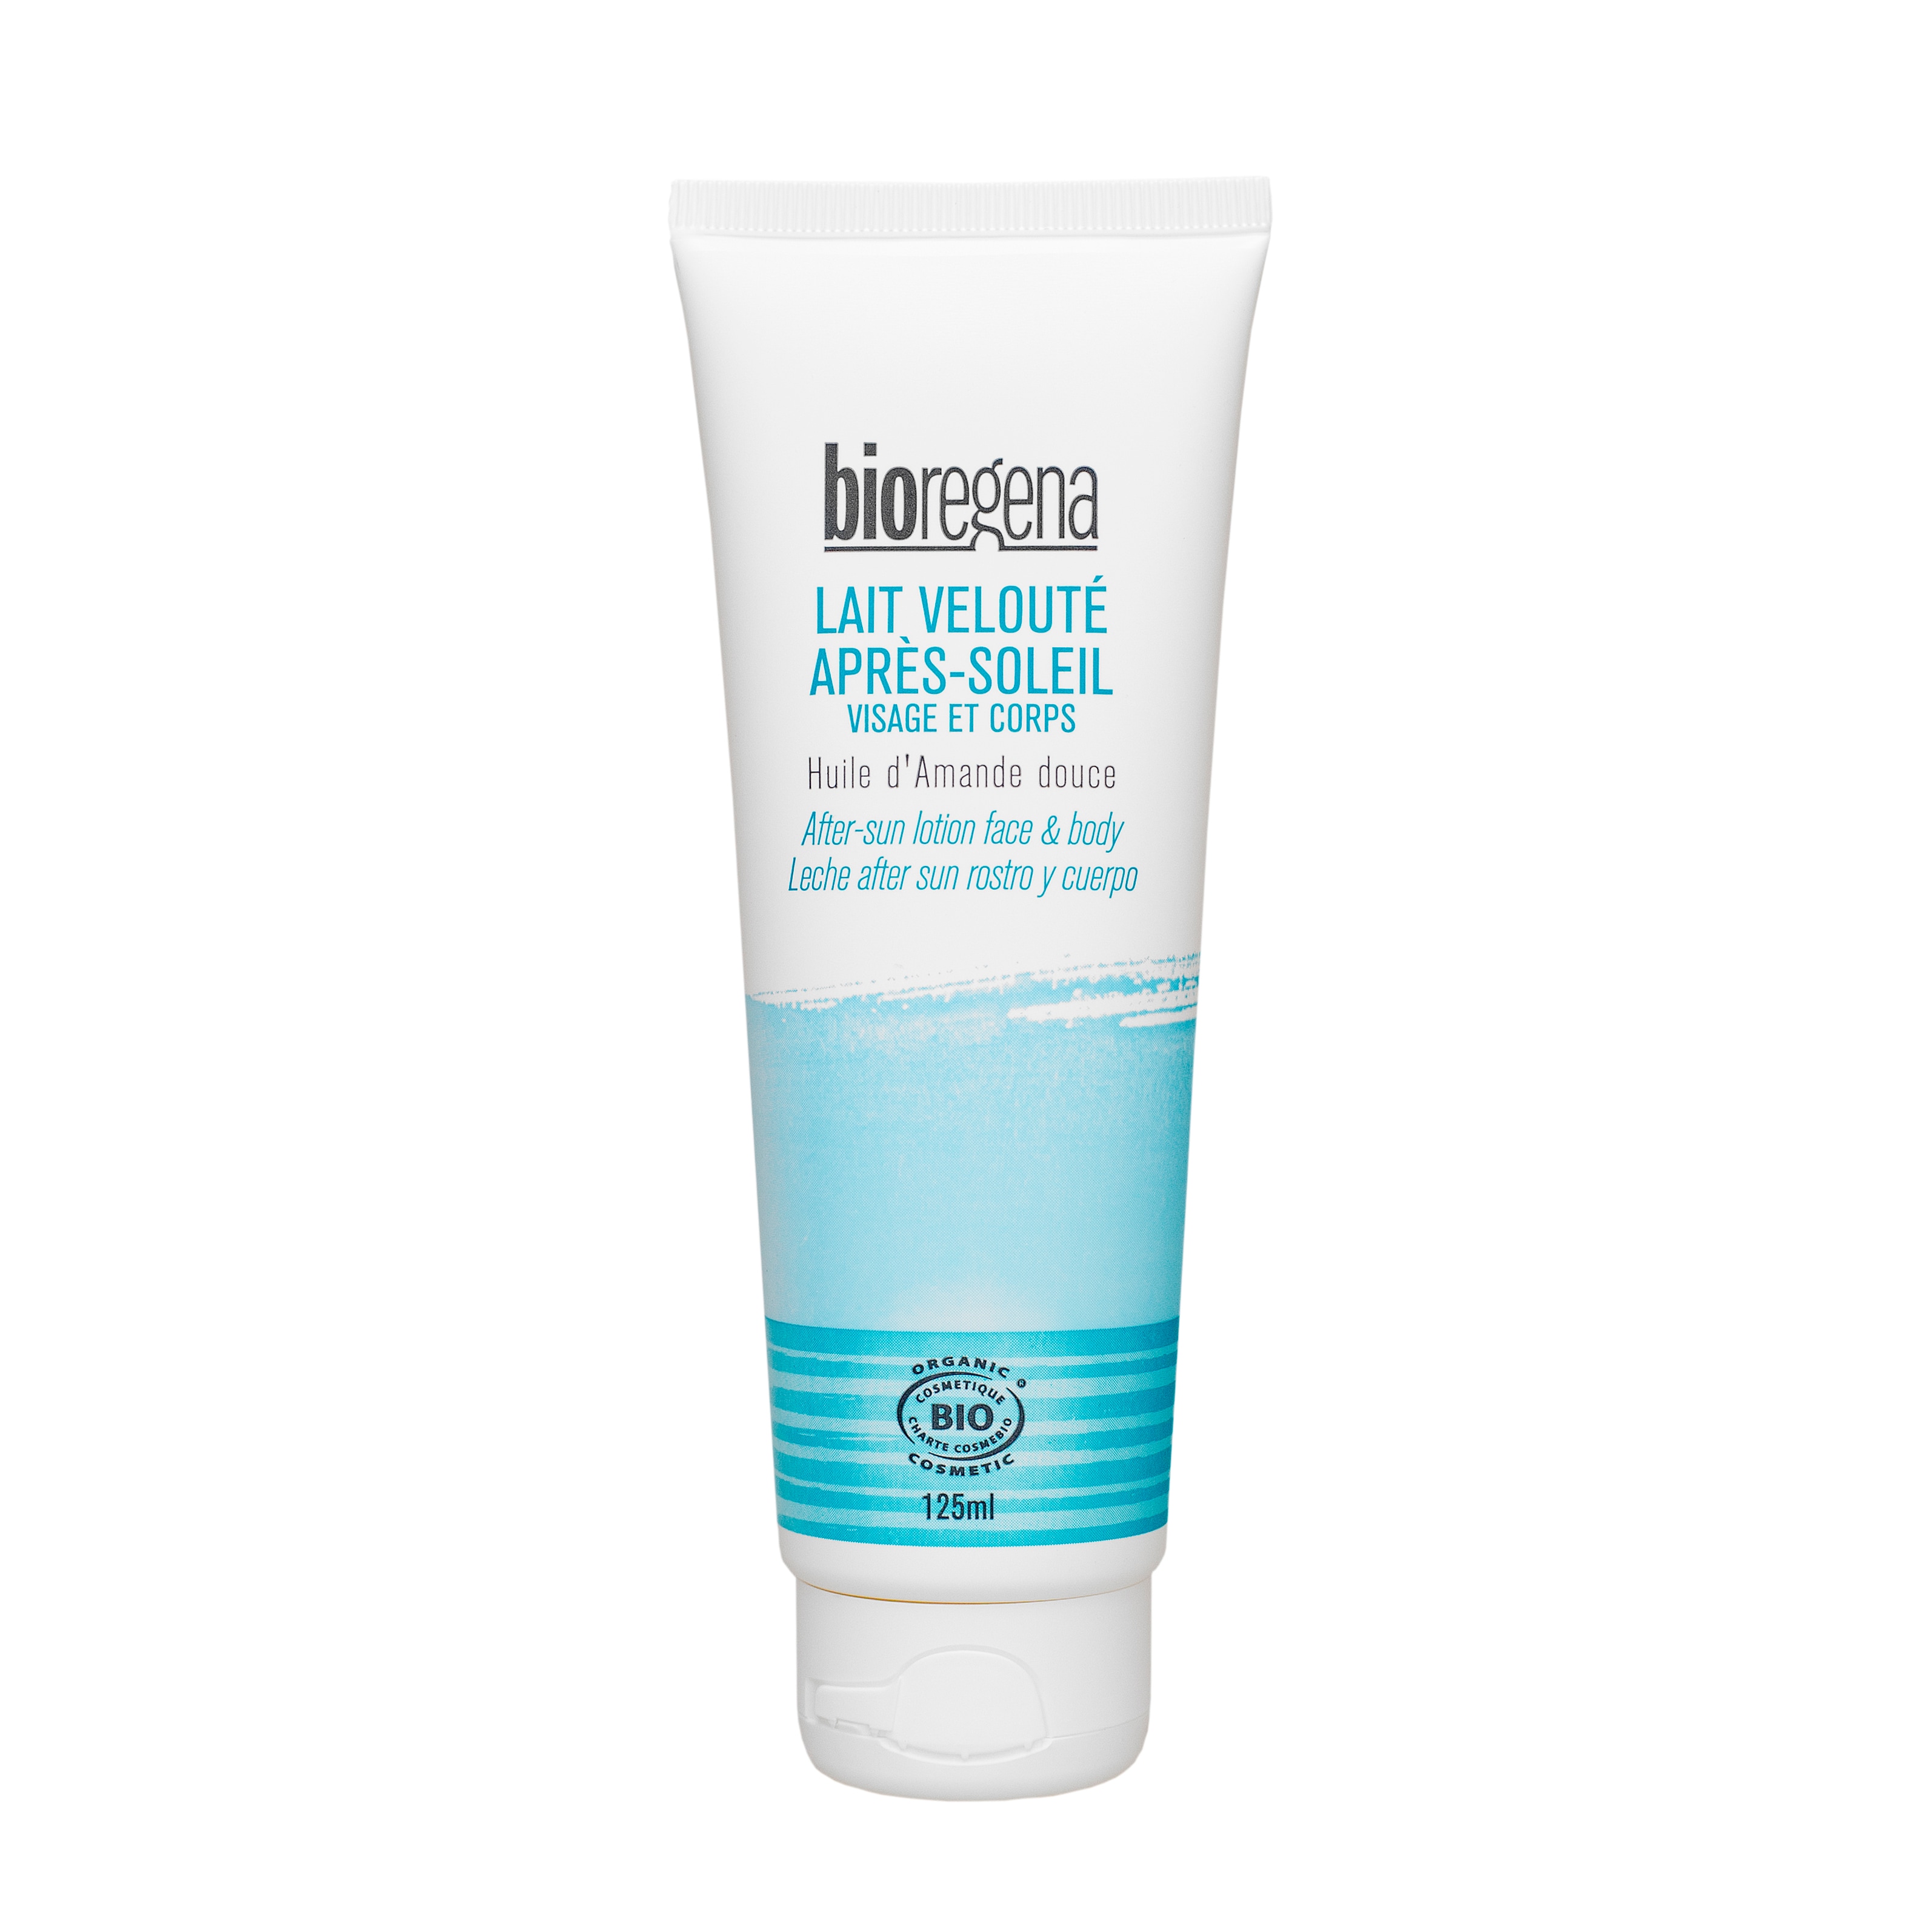 After sun lotion 125ml